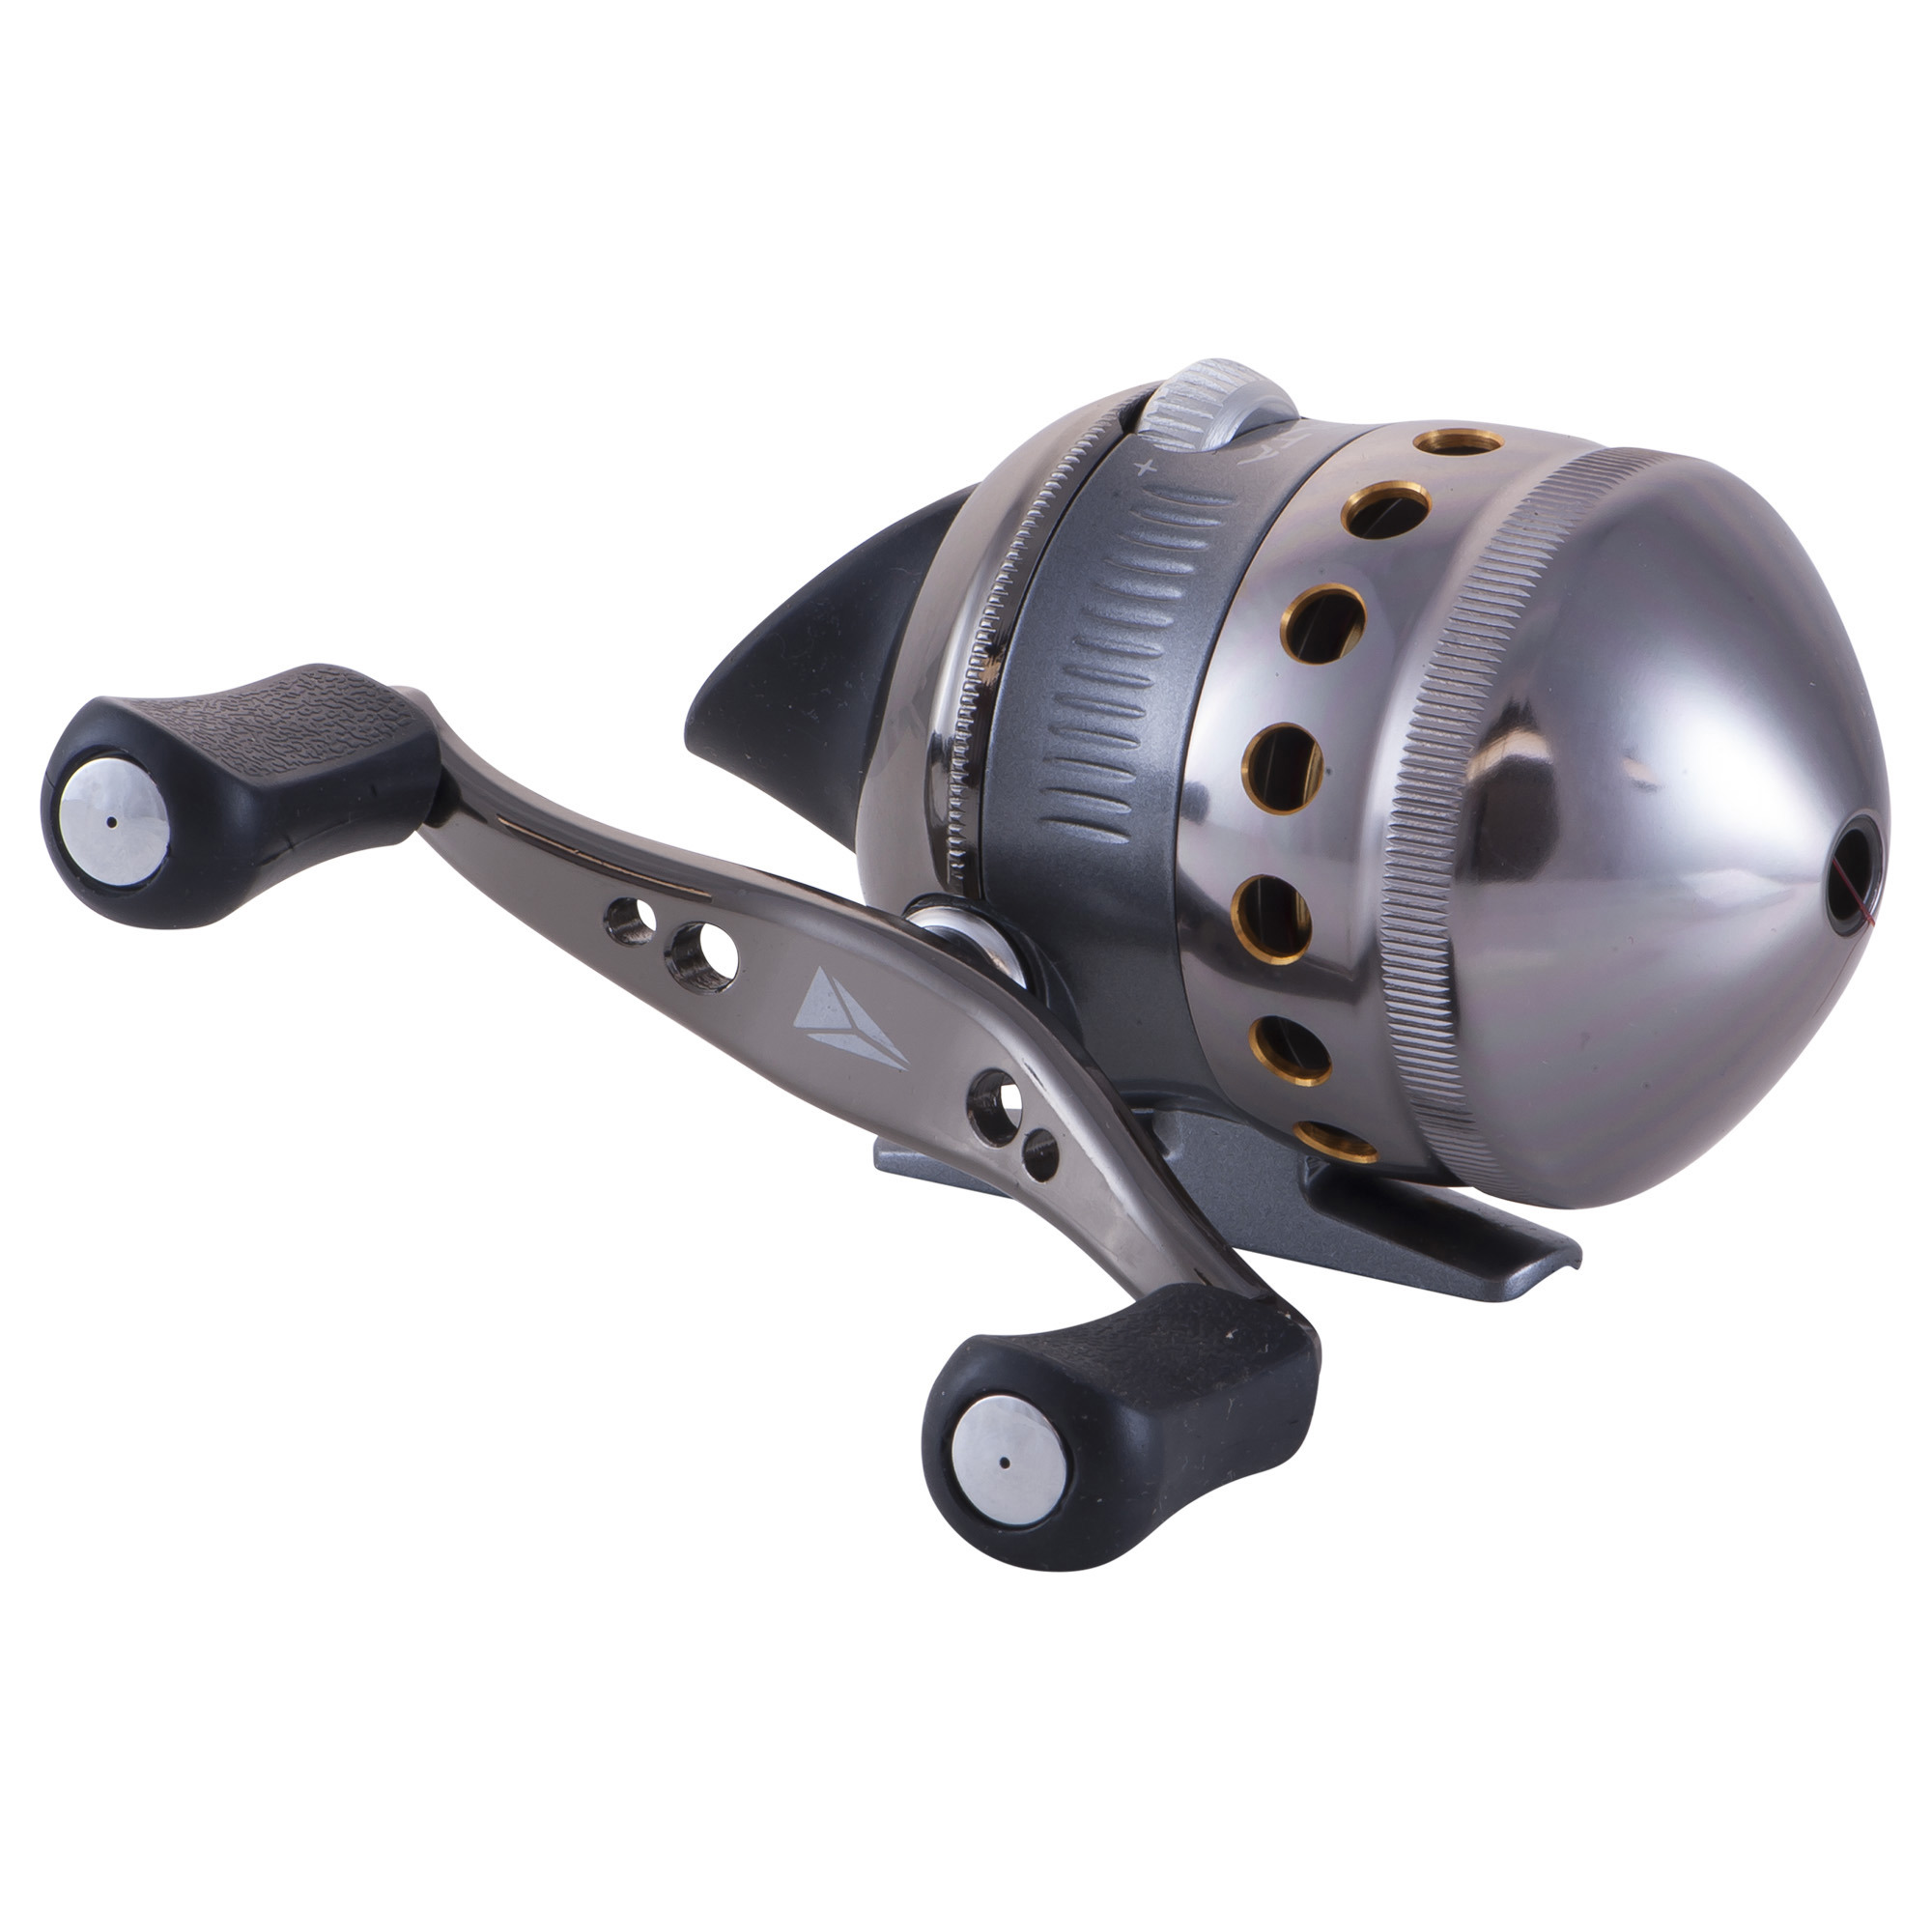 Zebco Omega Spincast Reel - Stainless